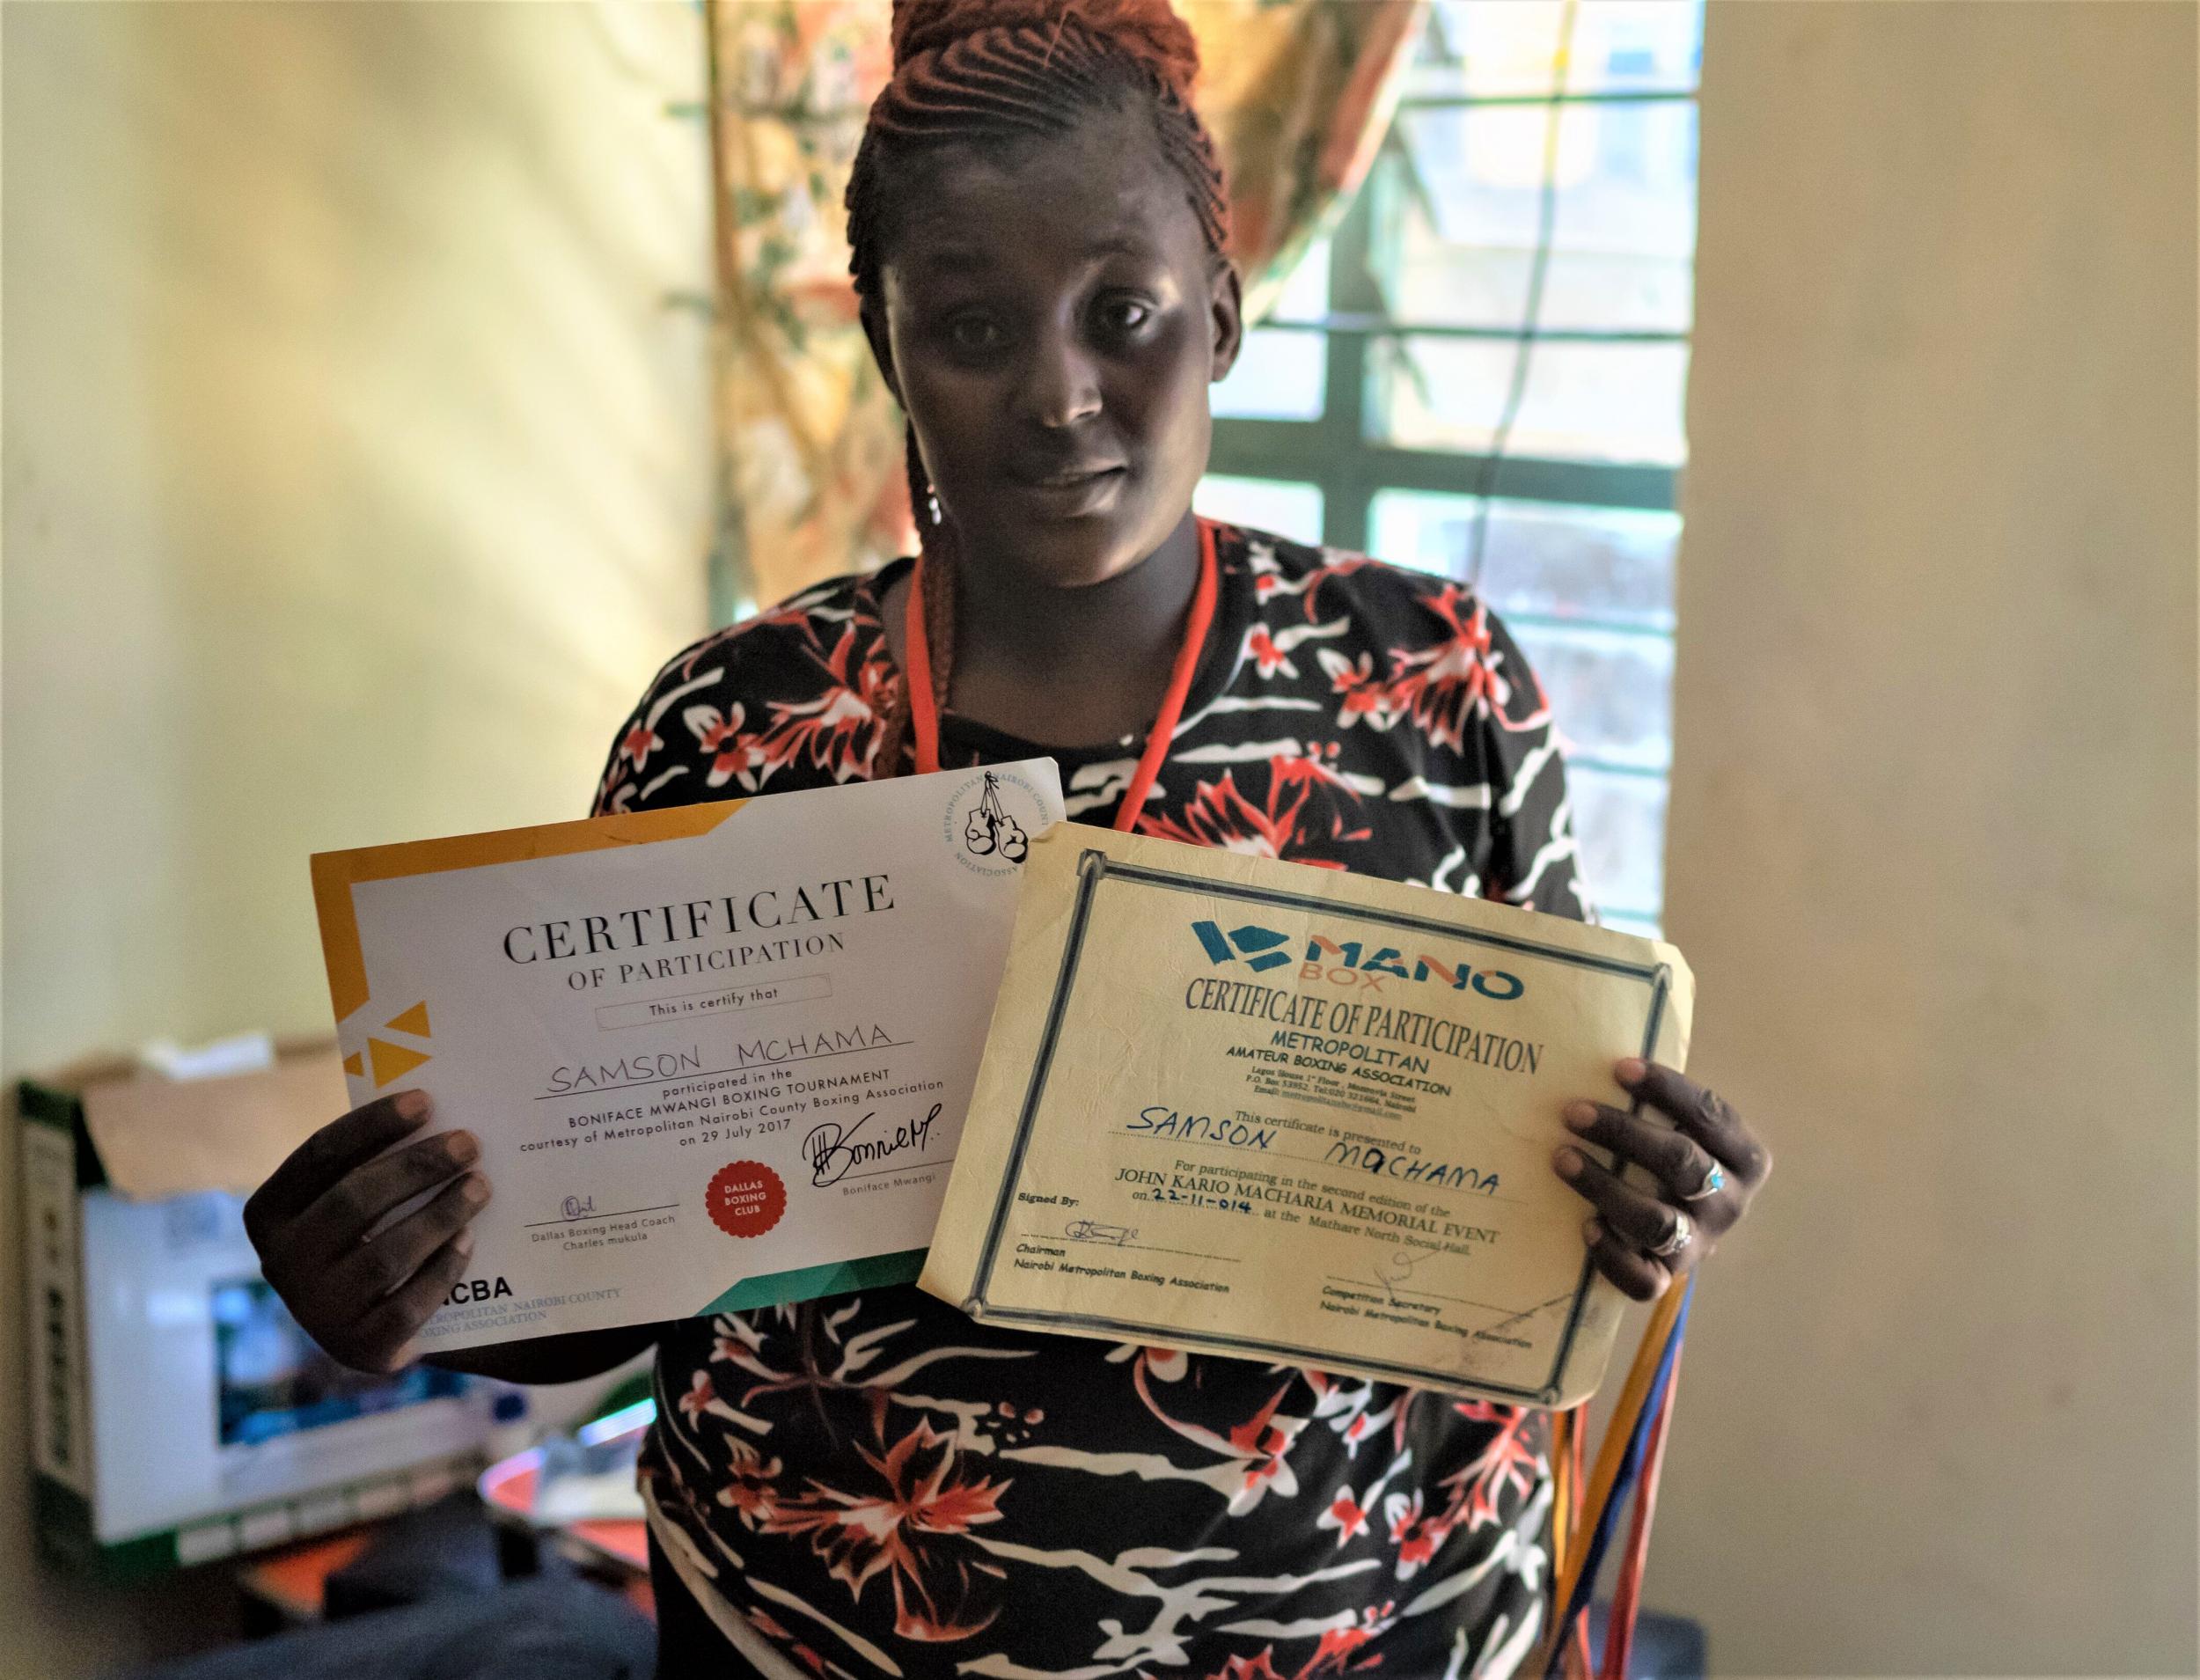 Purity Muchama holds up certificates awarded to her brother Samson, who was beaten to death